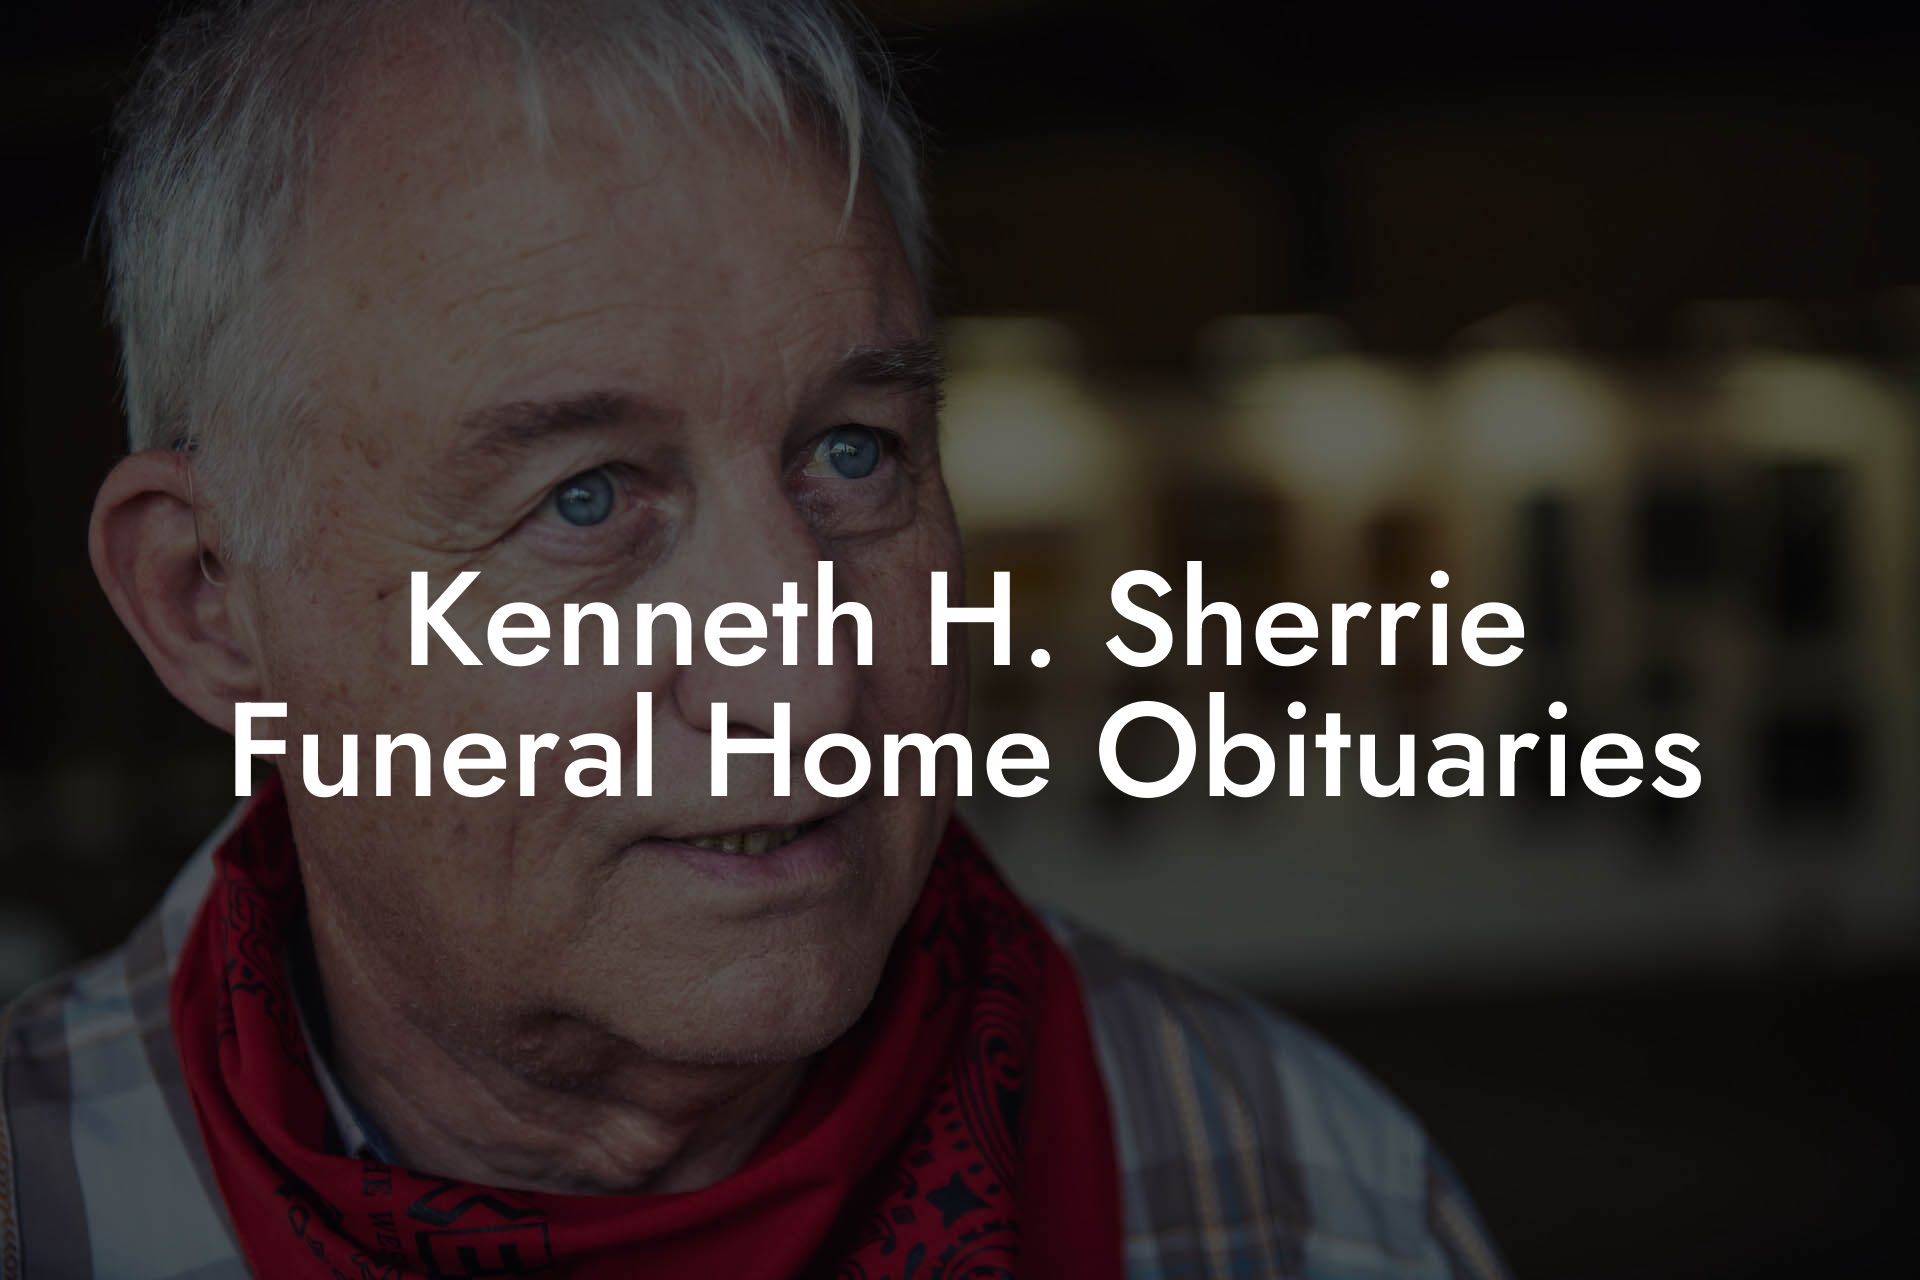 Kenneth H. Sherrie Funeral Home Obituaries